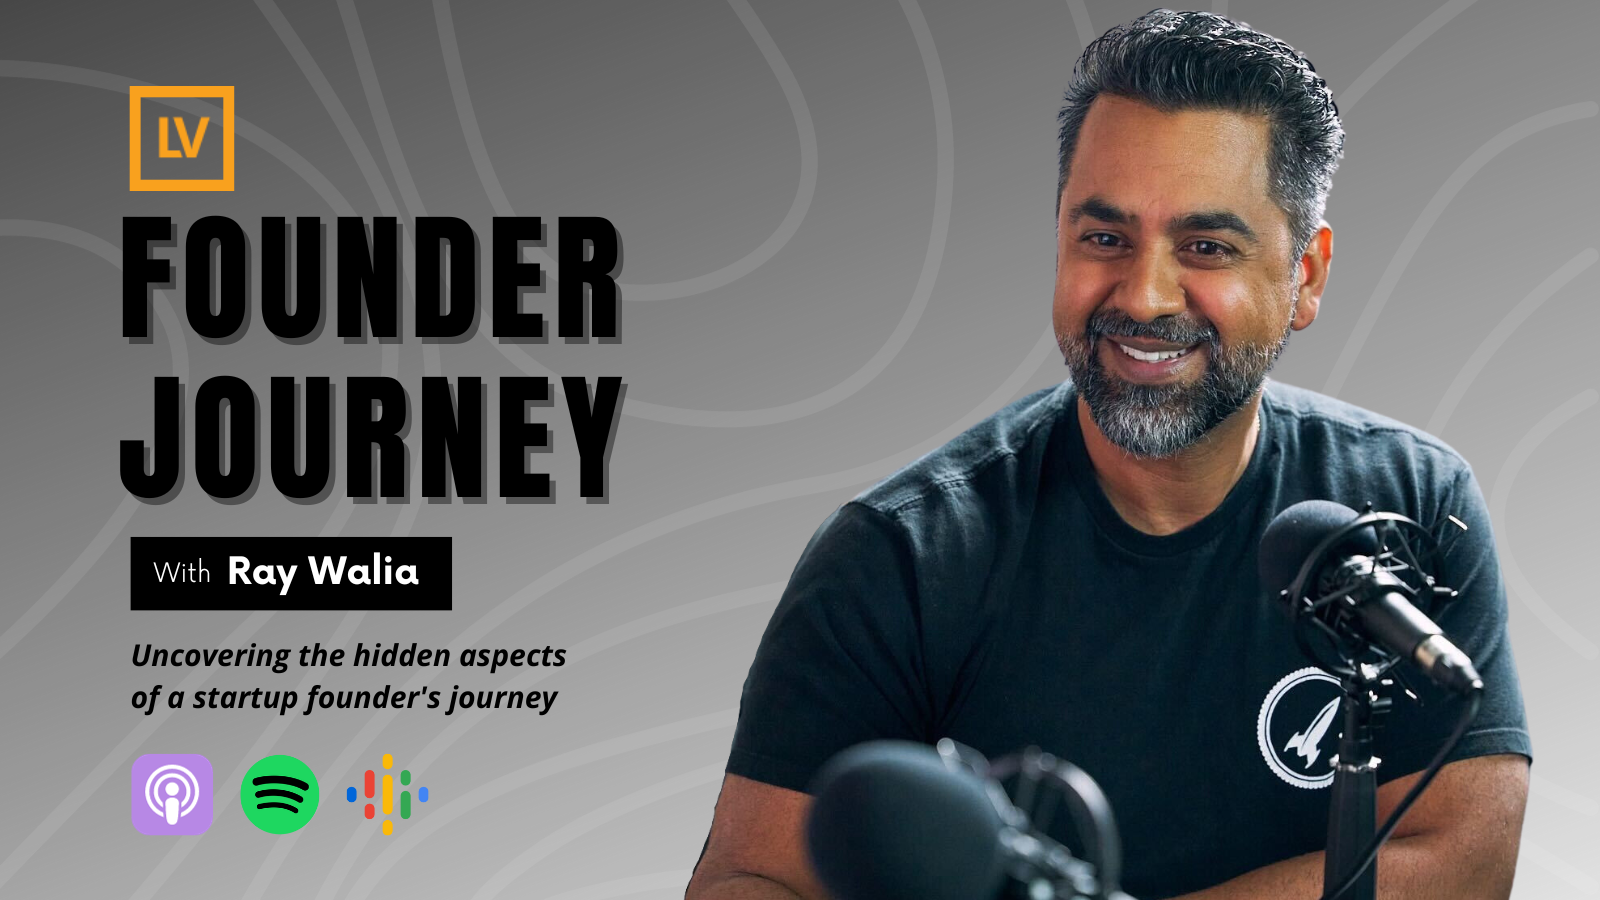 Top 5 Highlights from Founder Journey Podcast Season 4